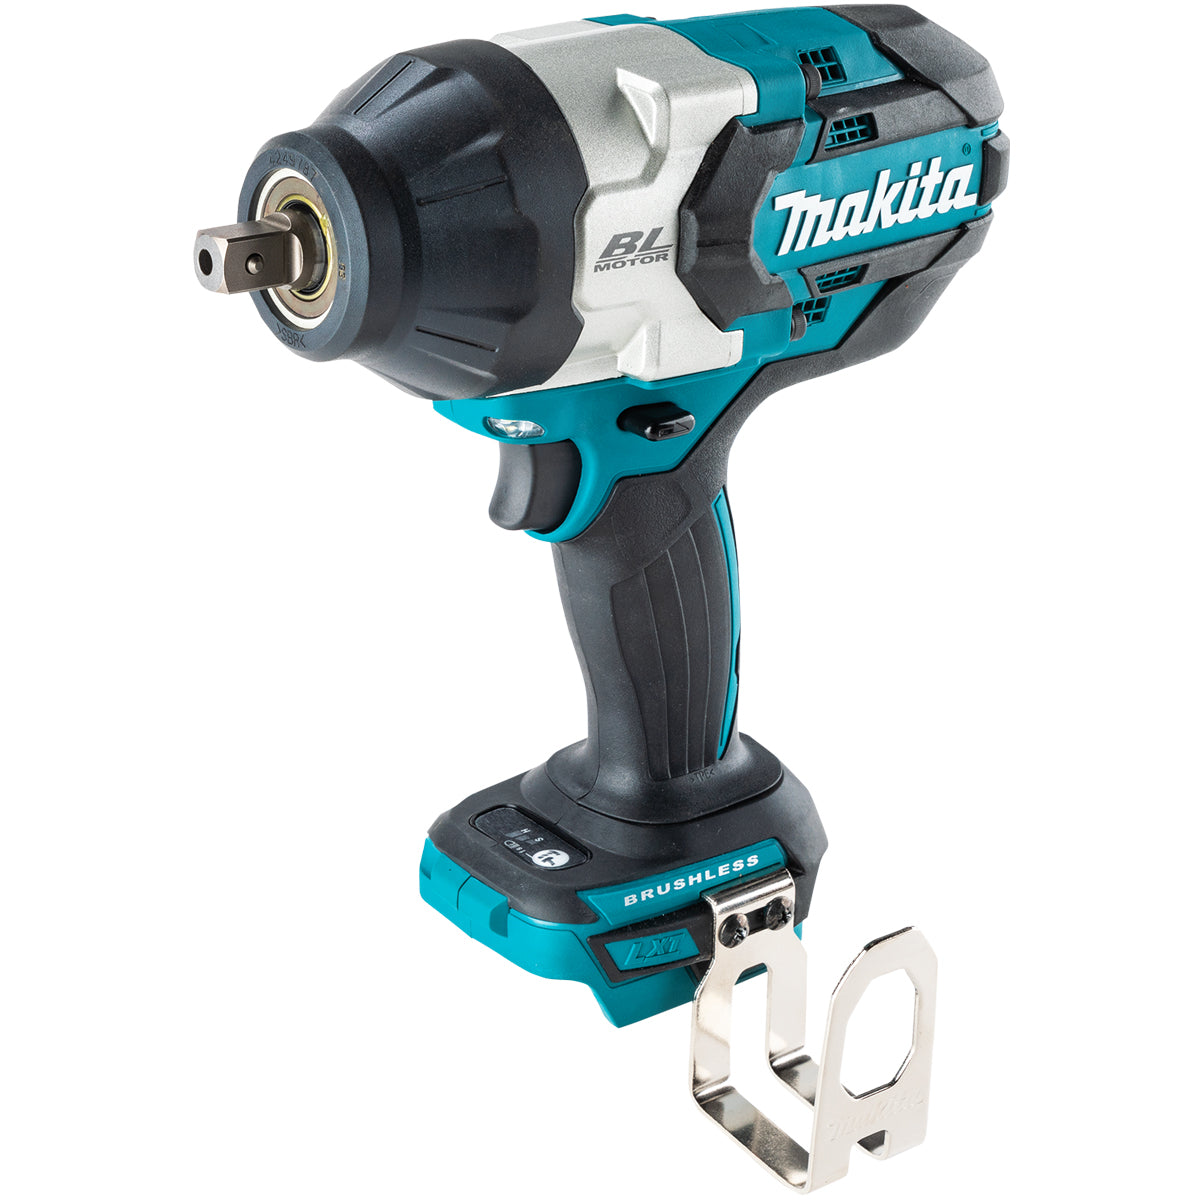 Makita DTW1004Z 18V LXT Brushless 1/2" Impact Wrench Body Only